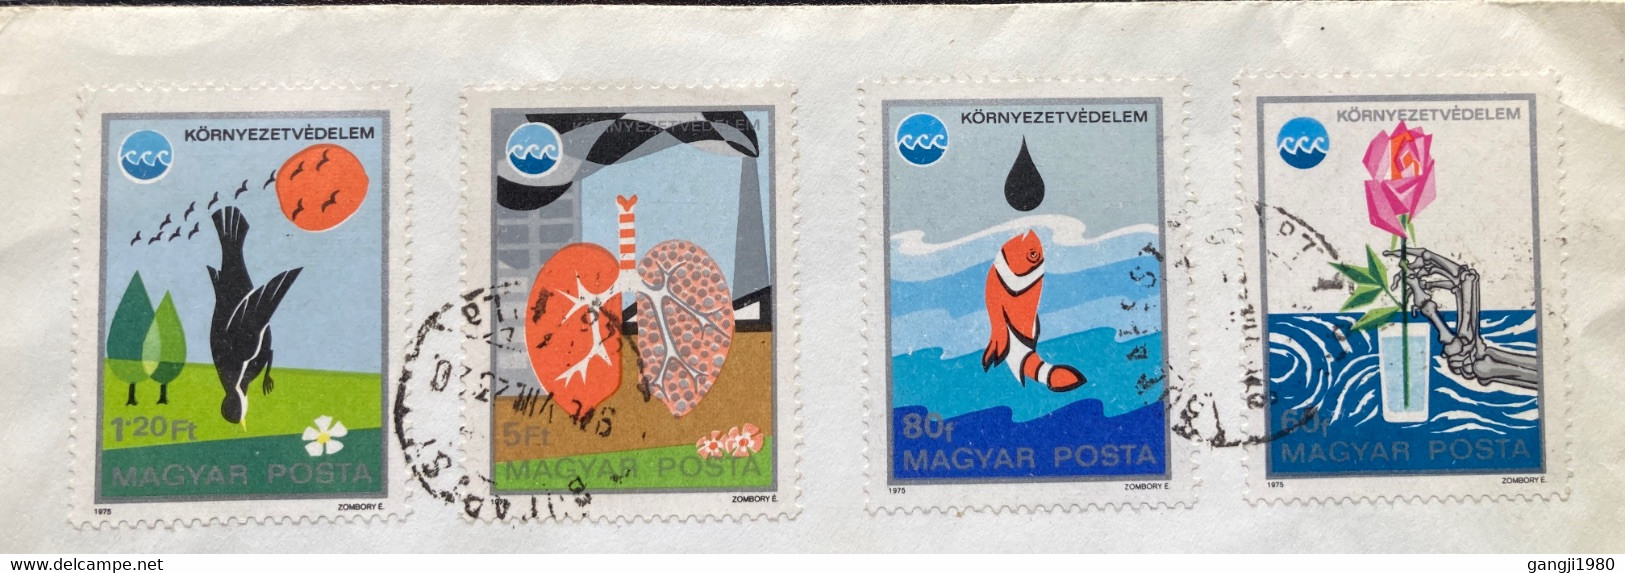 HUNGARY 1975, POLLUTION OF WATER,RIVER,ART,SMOKE ,HEALTH 4 STAMPS,COVER TO ENGLAND - Briefe U. Dokumente